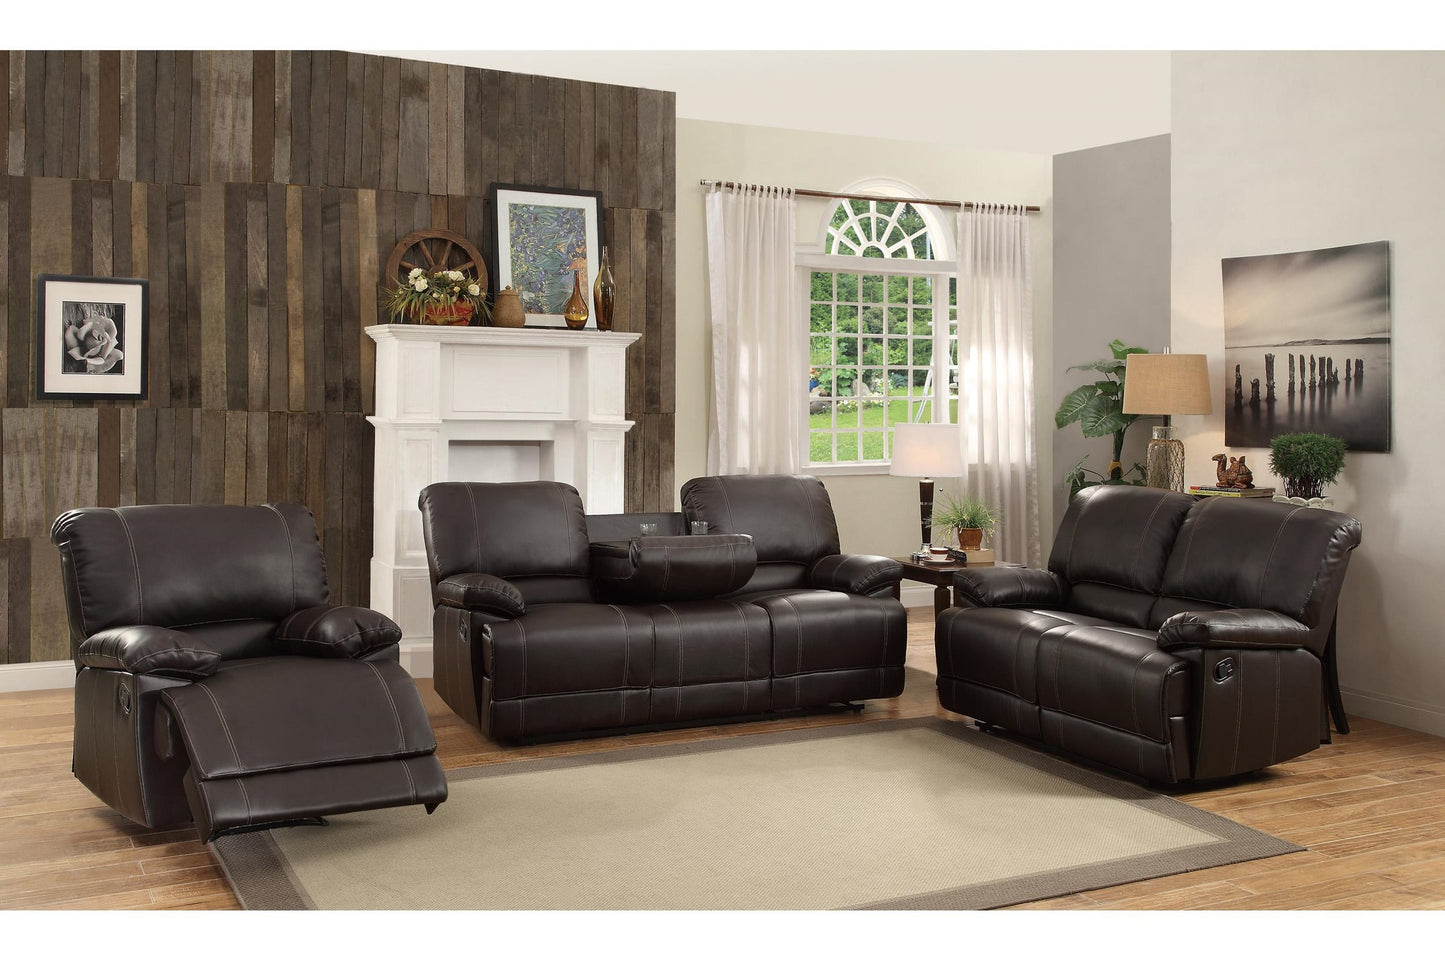 Homelegance Cassville 2PC Set Double Reclining Drop-Down Cup Holder Sofa & Love Seat in Dark Brown Leather